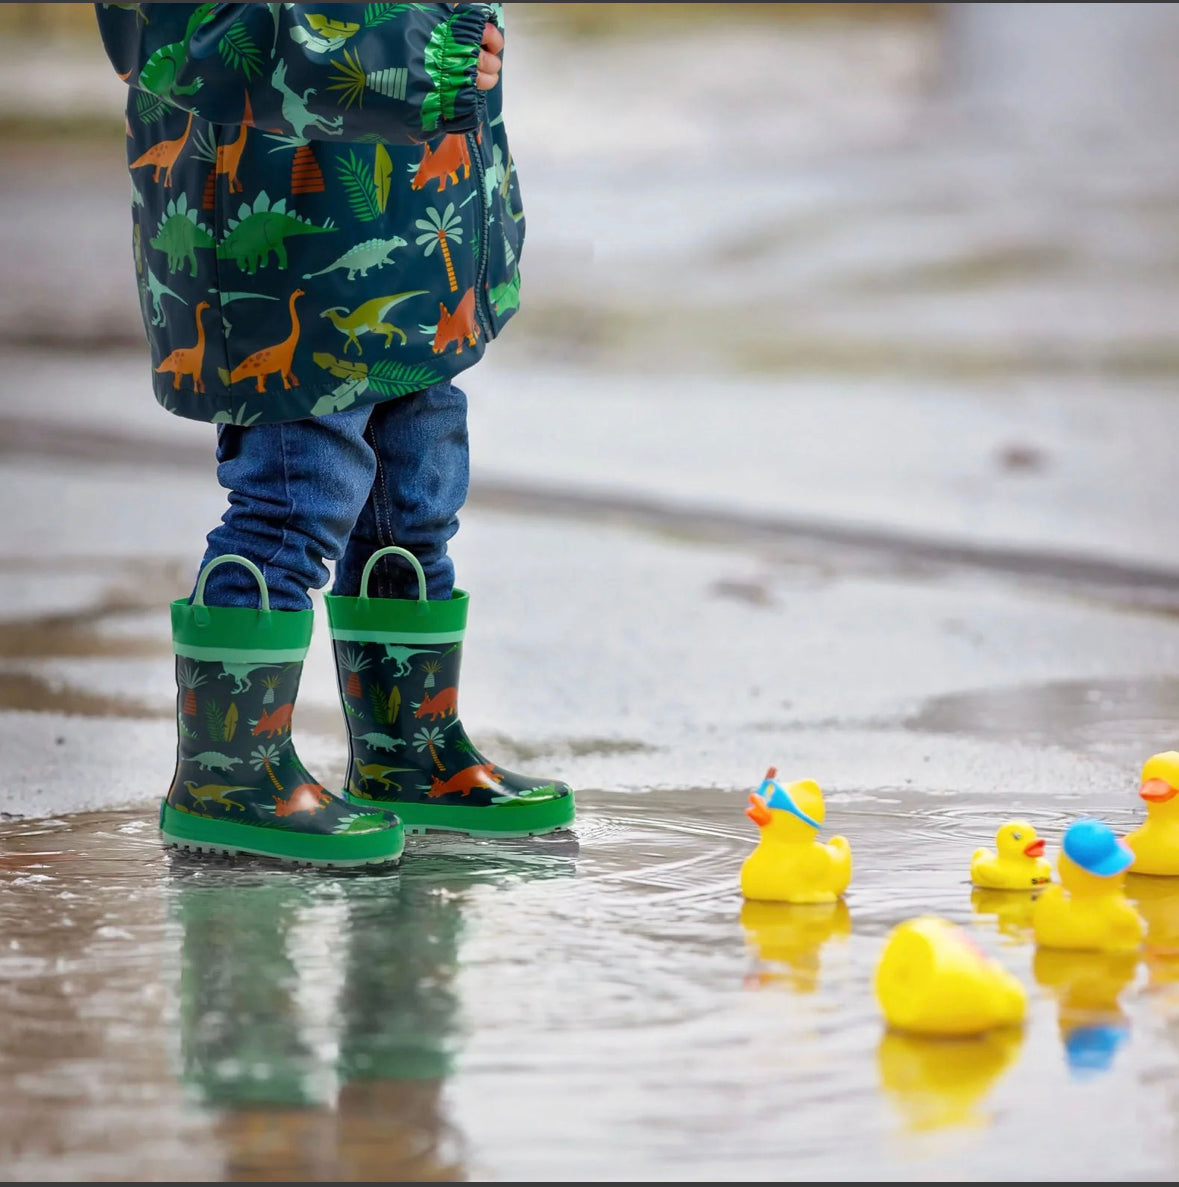 A child is standing in a puddle with Stephen Joseph's Rain Boots - Green Dinosaur.